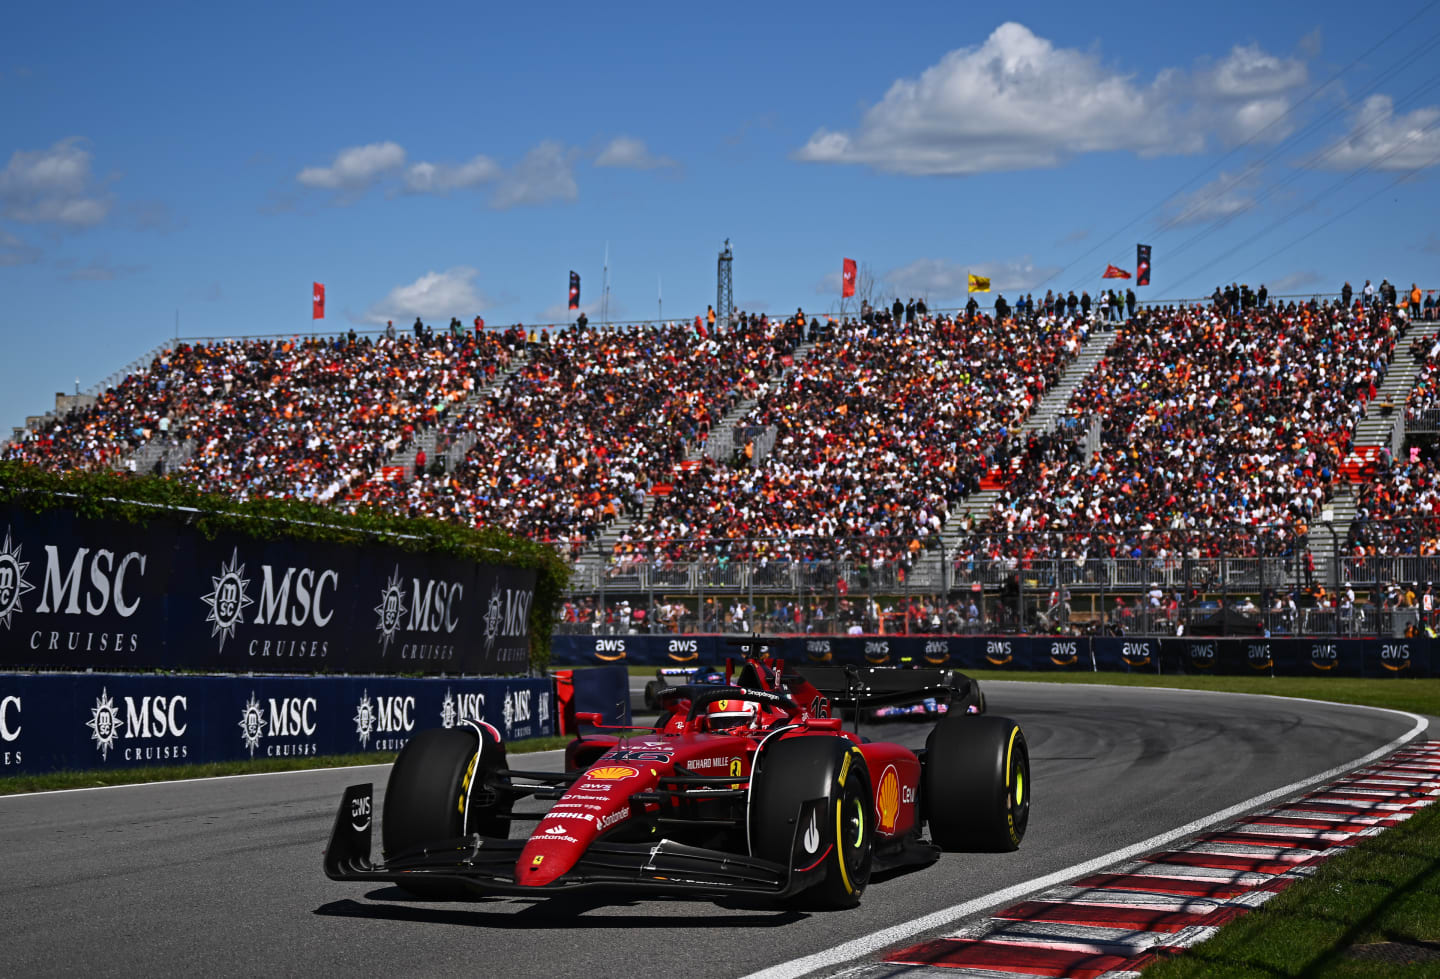 MONTREAL, QUEBEC - JUNE 19: Charles Leclerc of Monaco driving (16) the Ferrari F1-75 on track